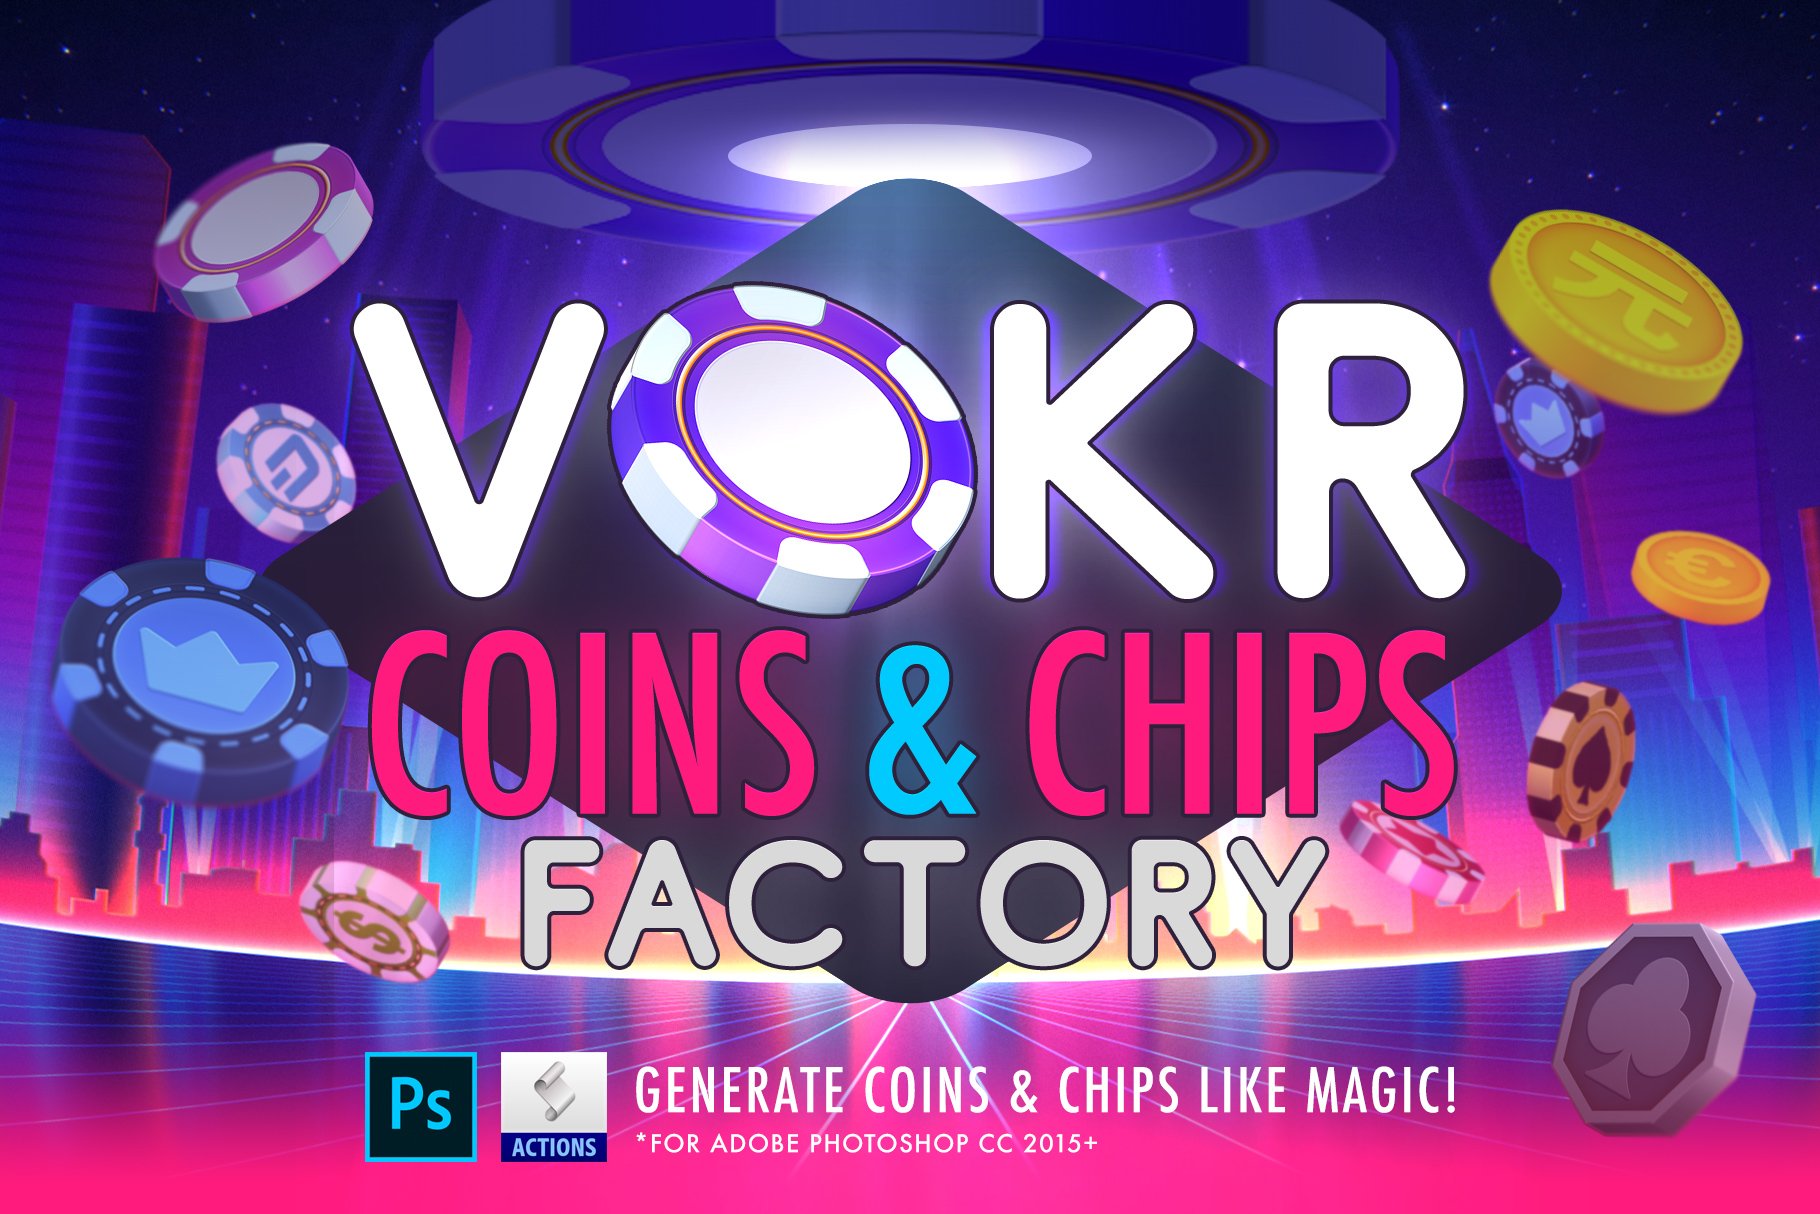 VOKR – Coins & Chips Factorycover image.